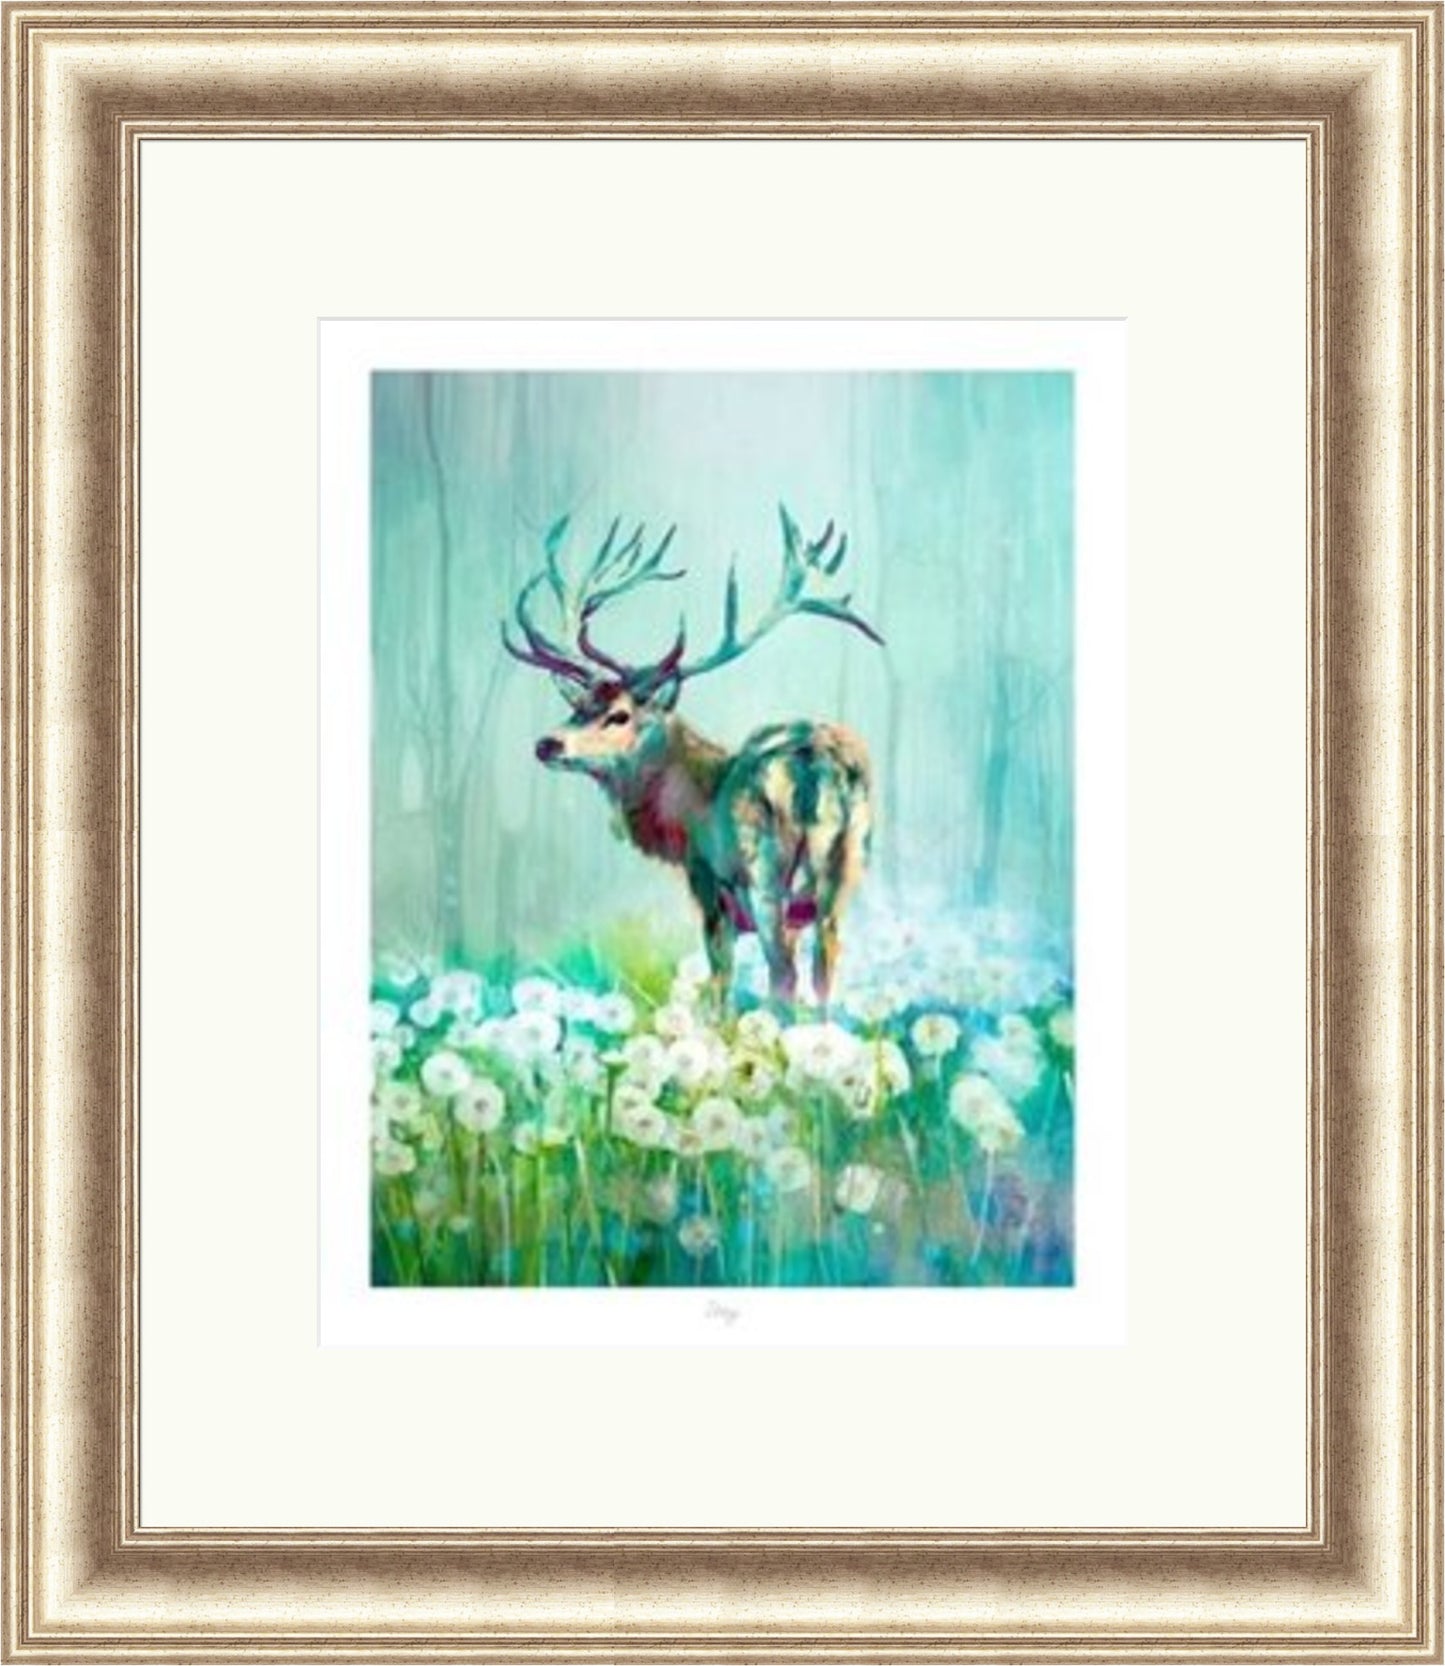 Stag by Lee Scammacca